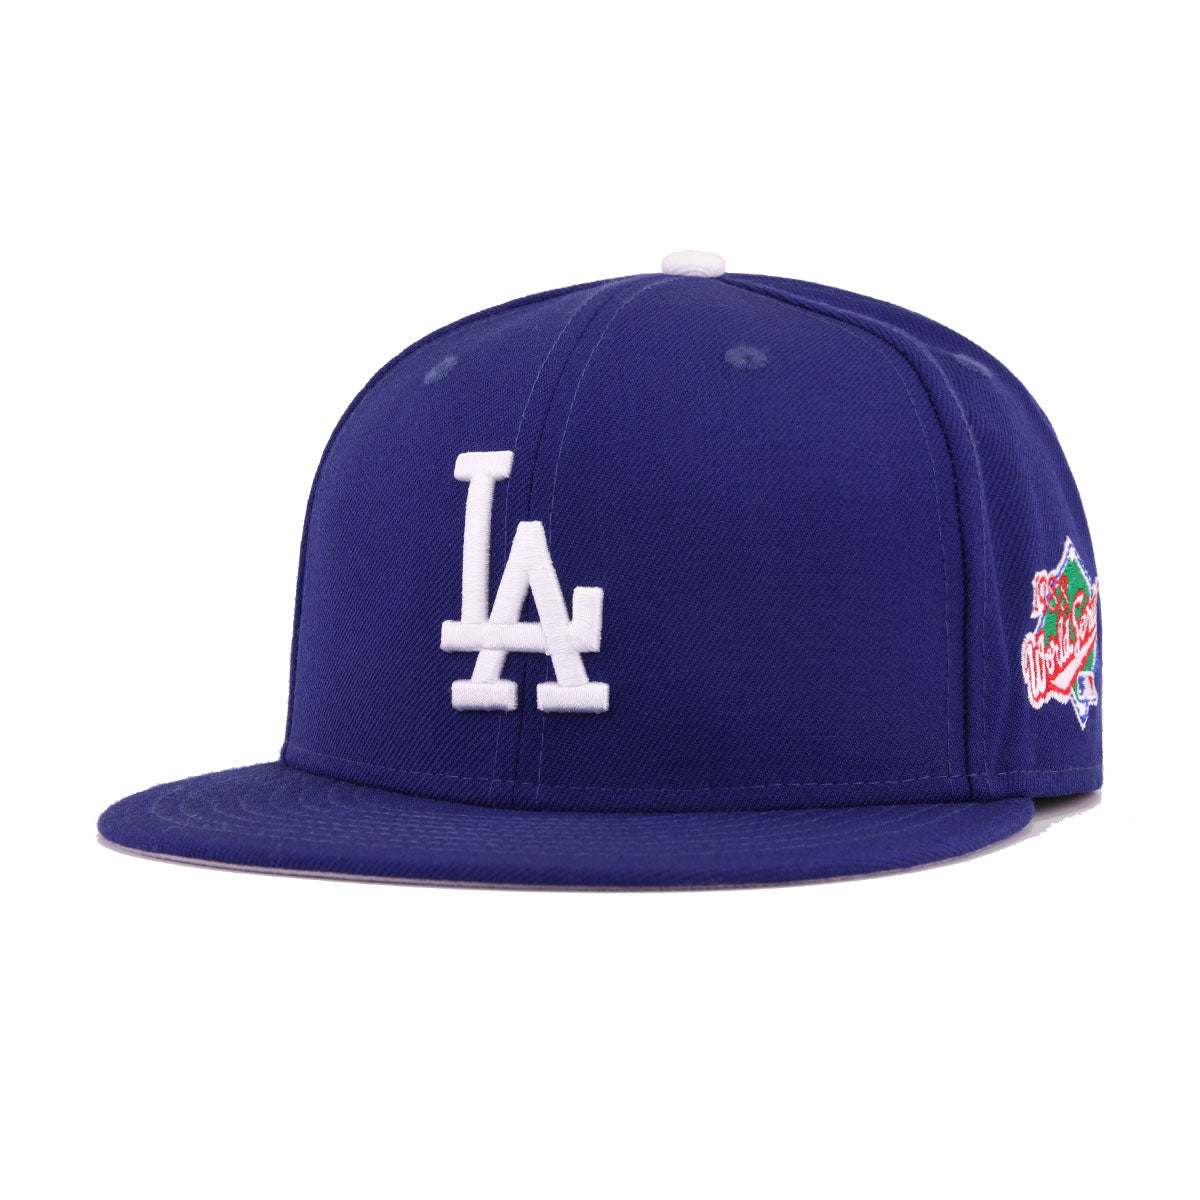 Shop Los Angeles Dodgers Snapback Hats & Fitted Caps